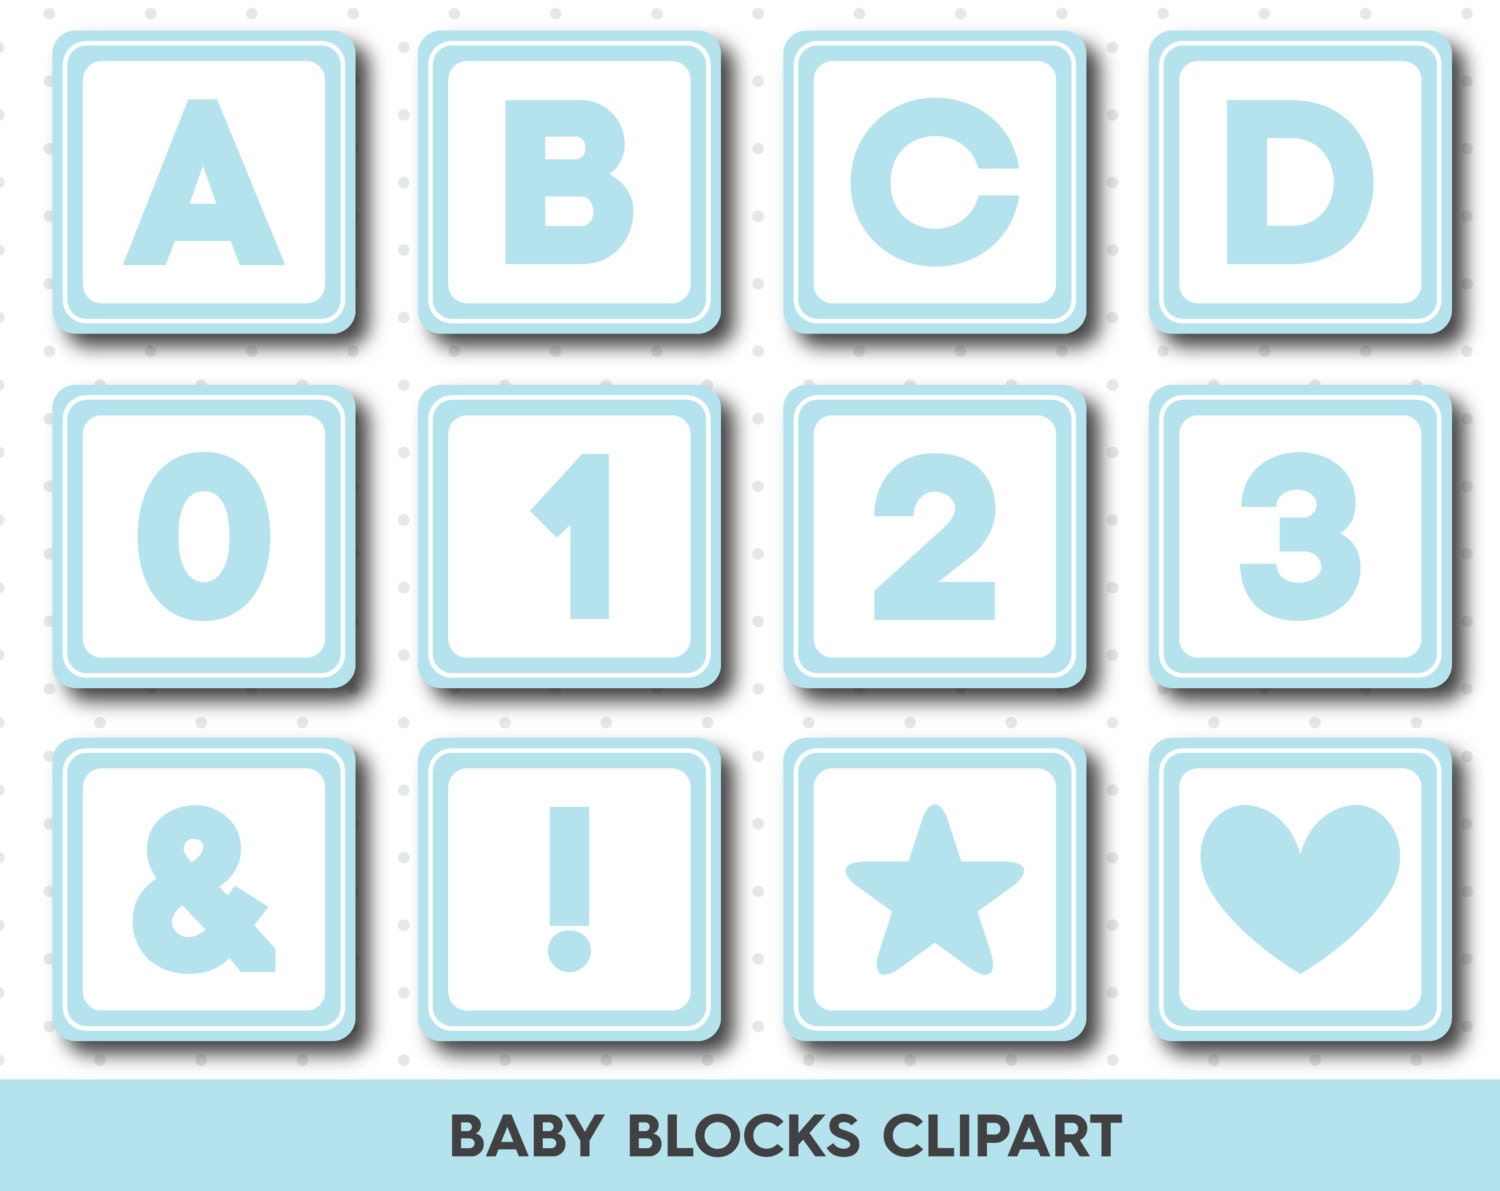 free clip art baby block letters - photo #19